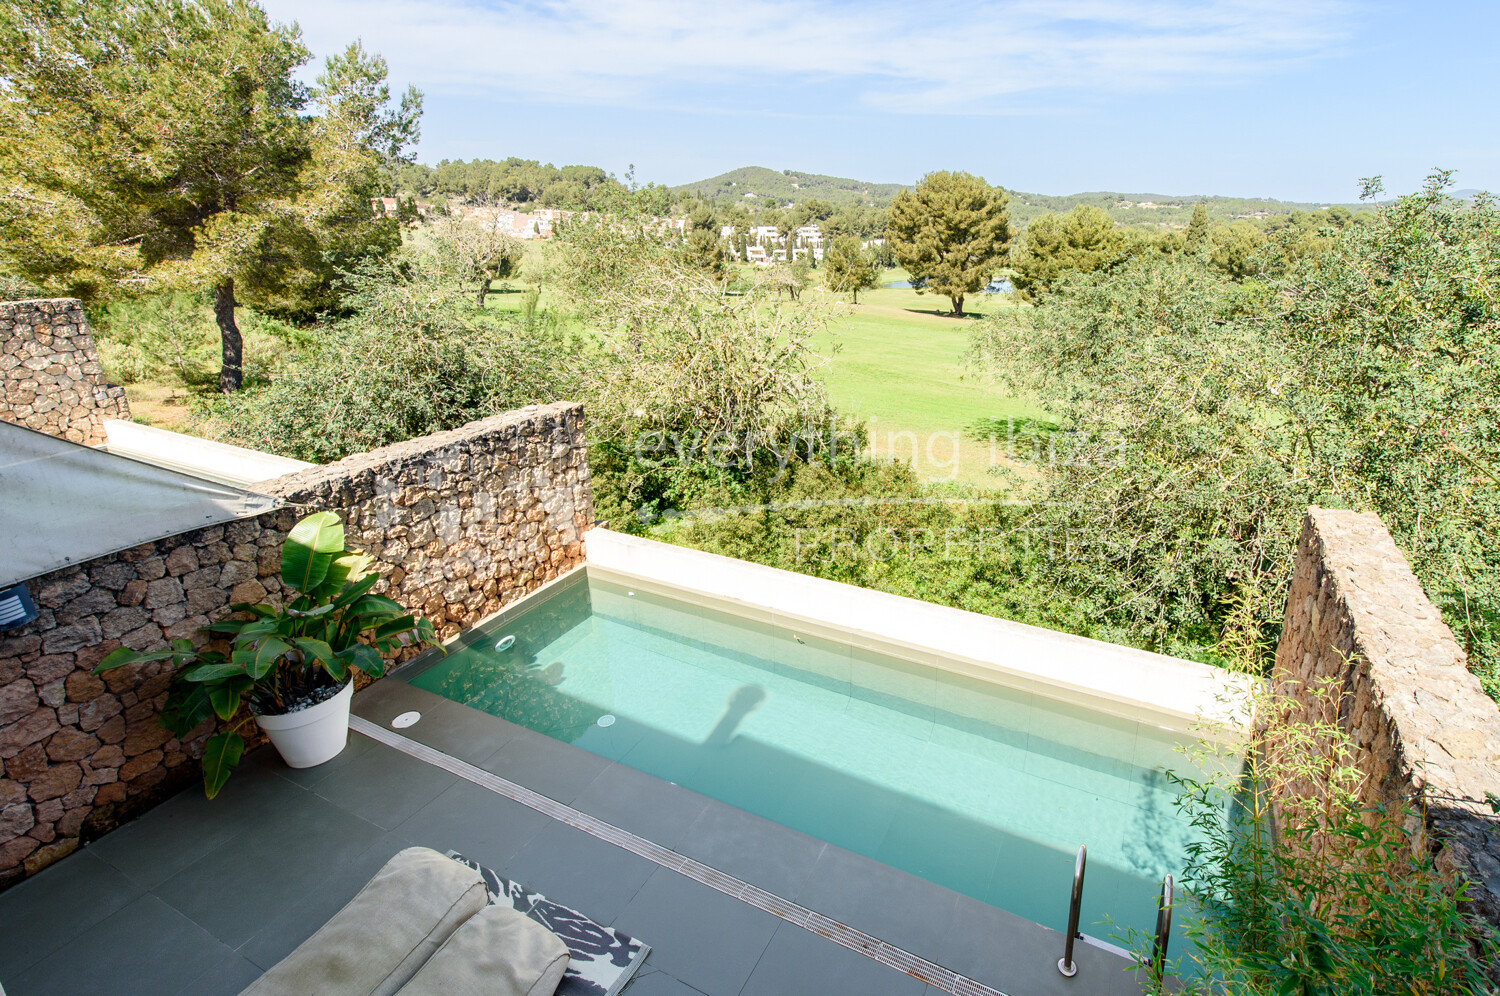 Beautiful Townhouse with Private Pool Overlooking the Golf Course, ref. 1601, for sale in Ibiza by everything ibiza Properties